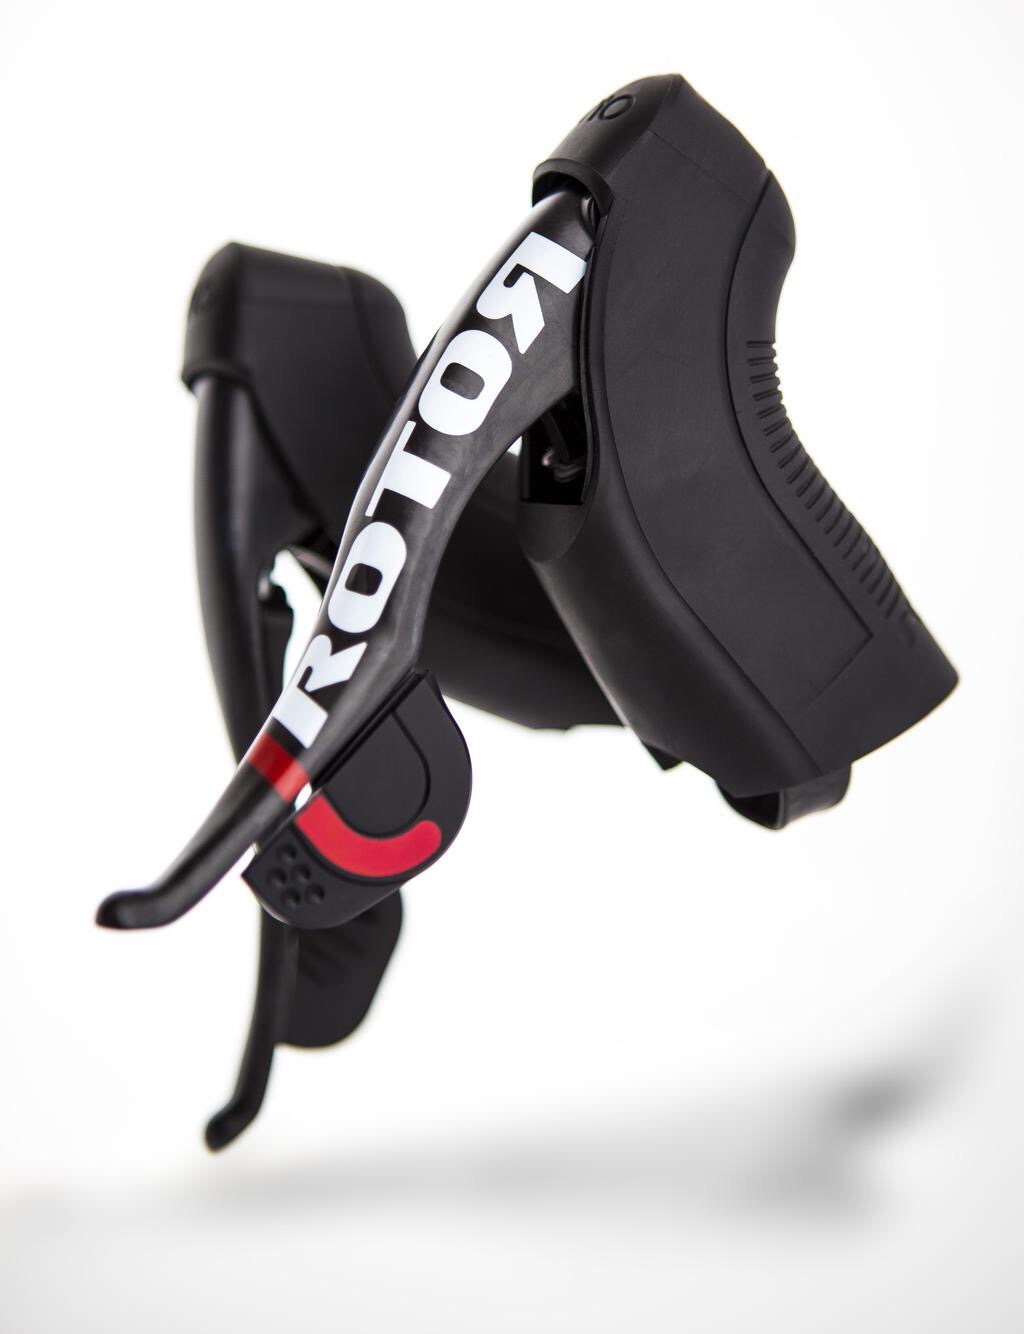 Uno Brakes/Shifter Levers